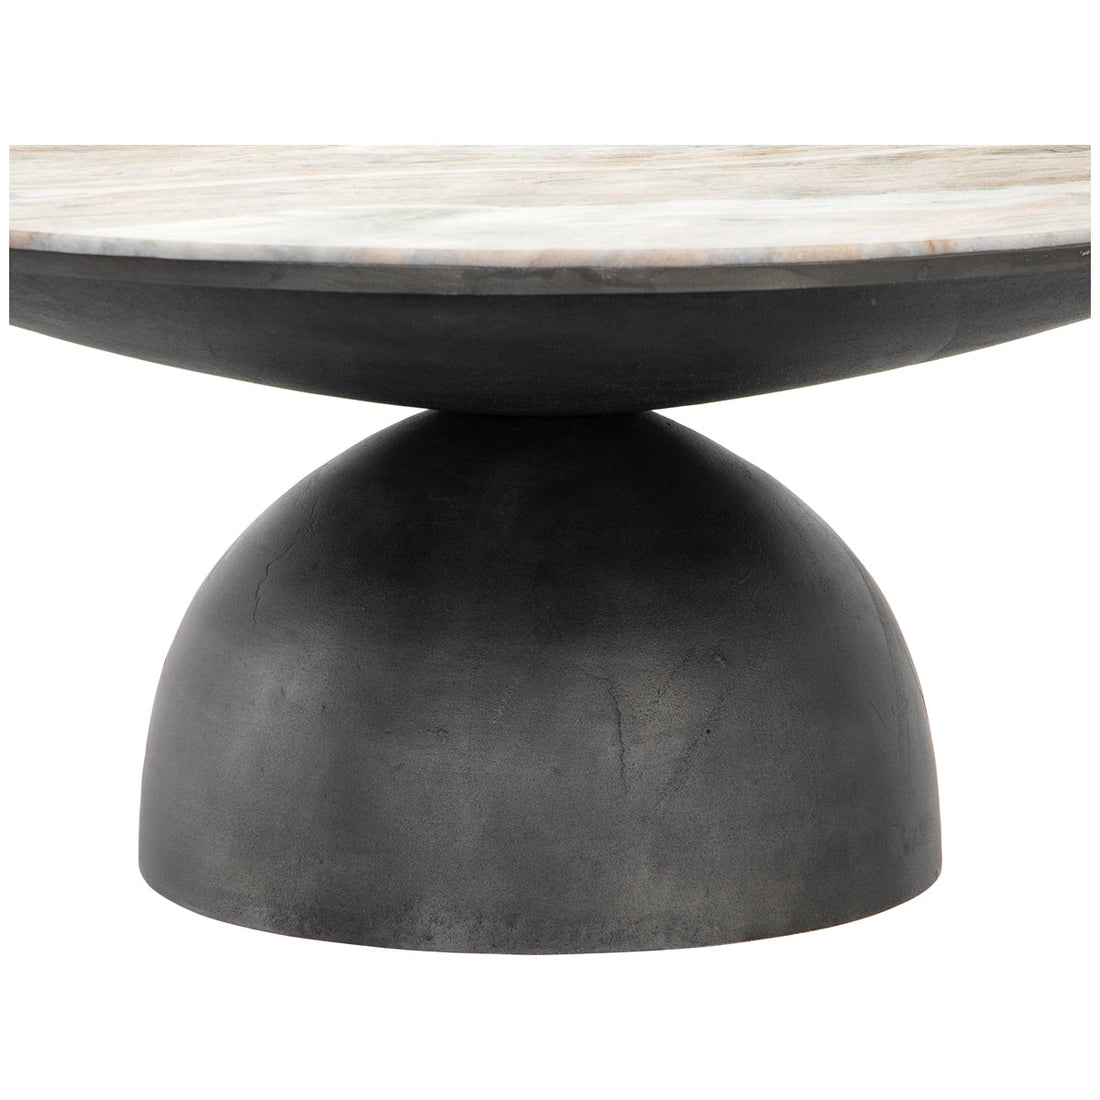 Four Hands Marlow Corbett Coffee Table - Creamy Taupe